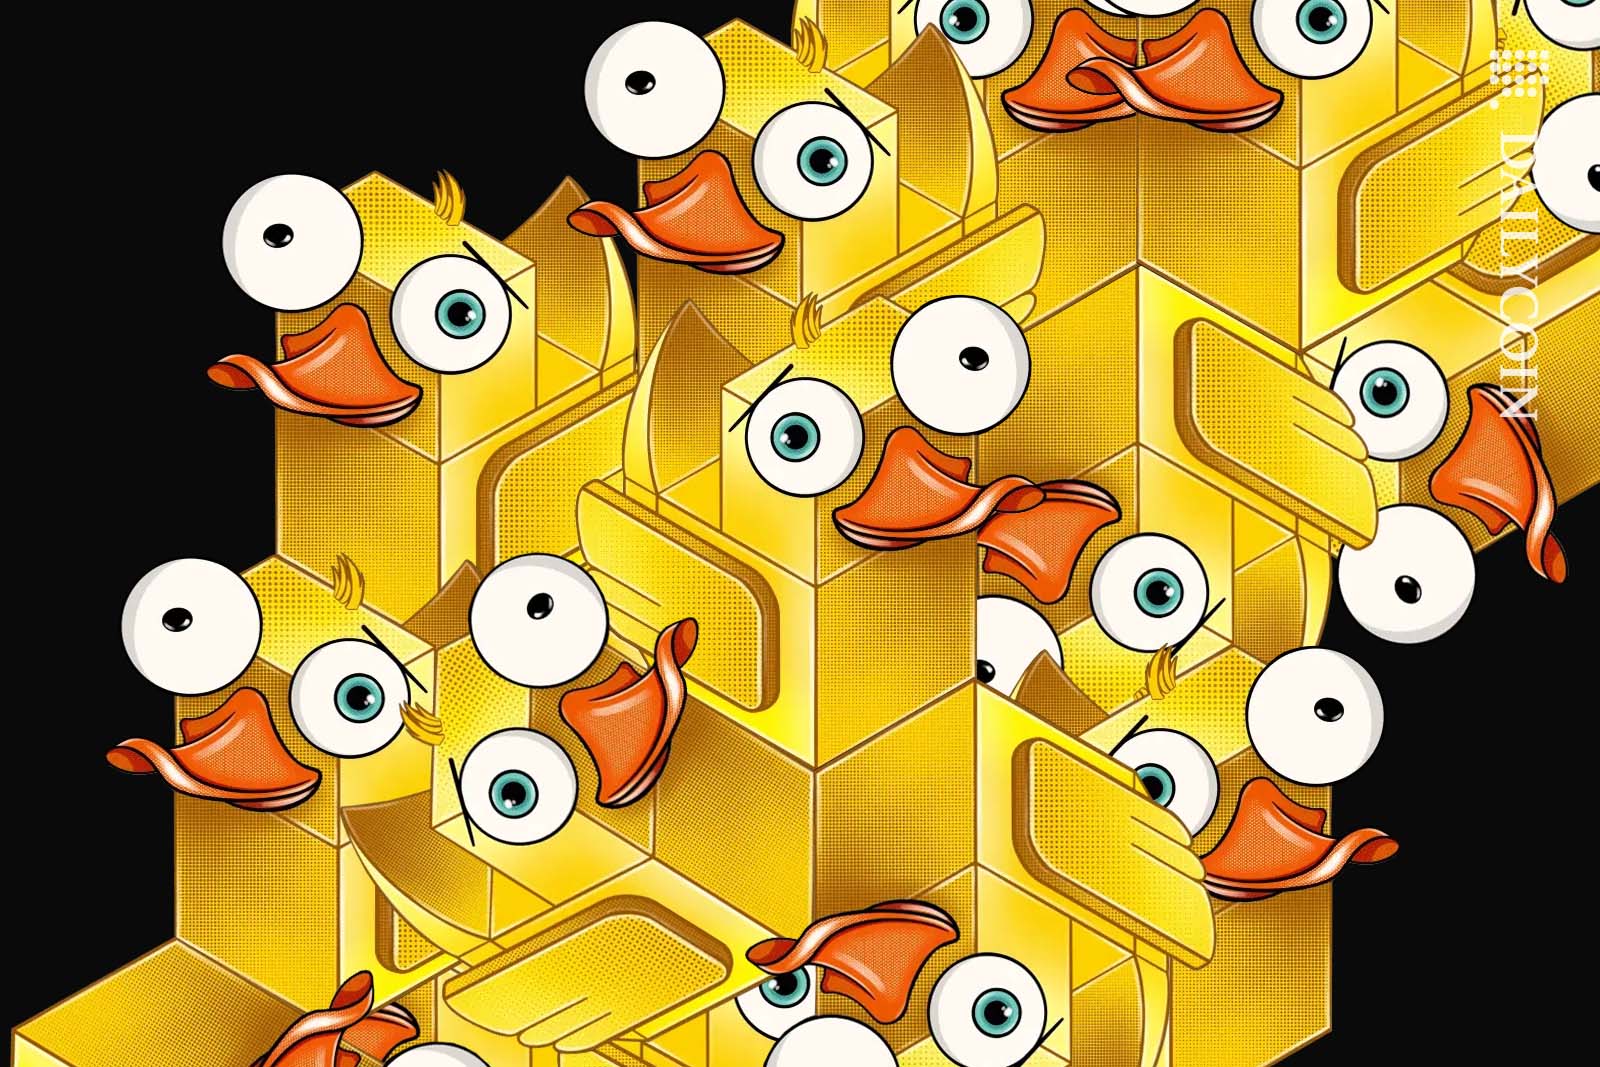 Lots of abstract duck illustrations arranged in a isometric manner.